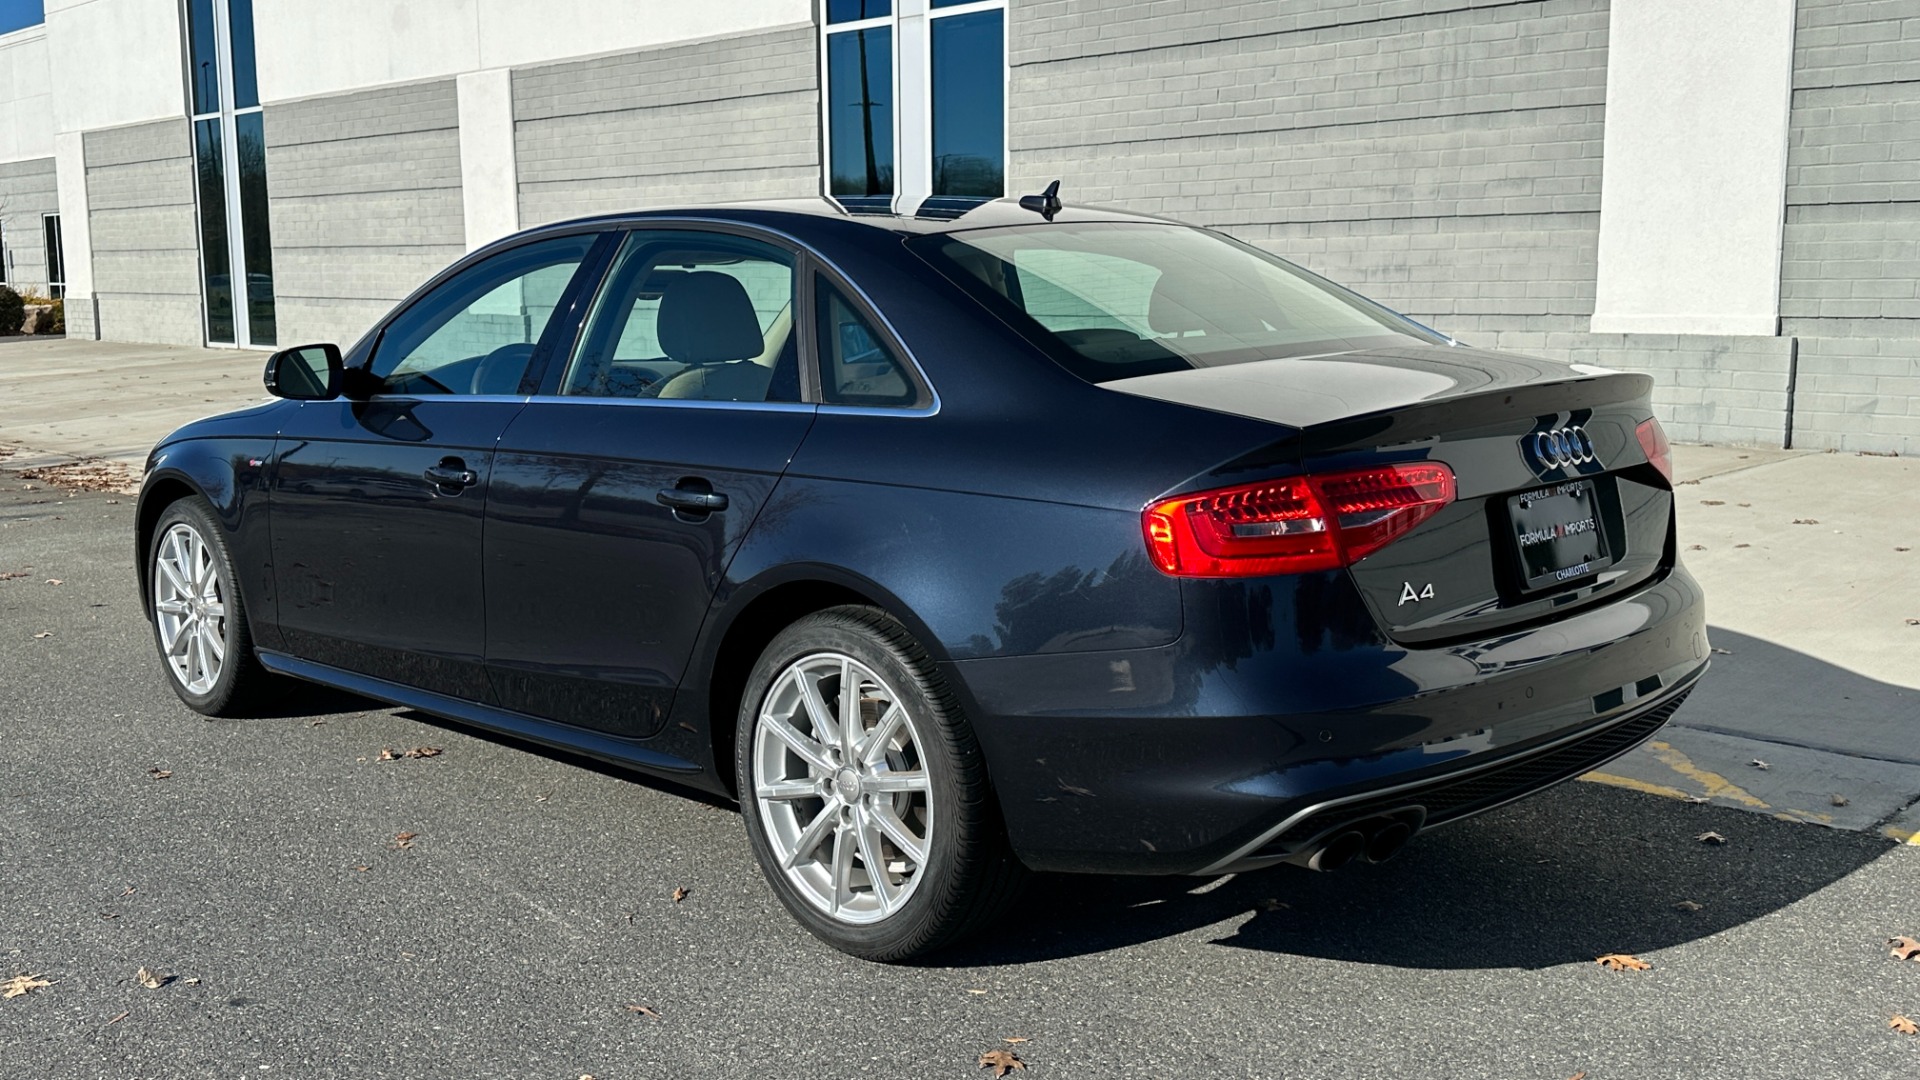 Used 2014 Audi A4 PREMIUM PLUS / NAVIGATION PLUS / BLINDSPOT ASSIST / LEATHER / SUNROOF for sale $21,900 at Formula Imports in Charlotte NC 28227 4